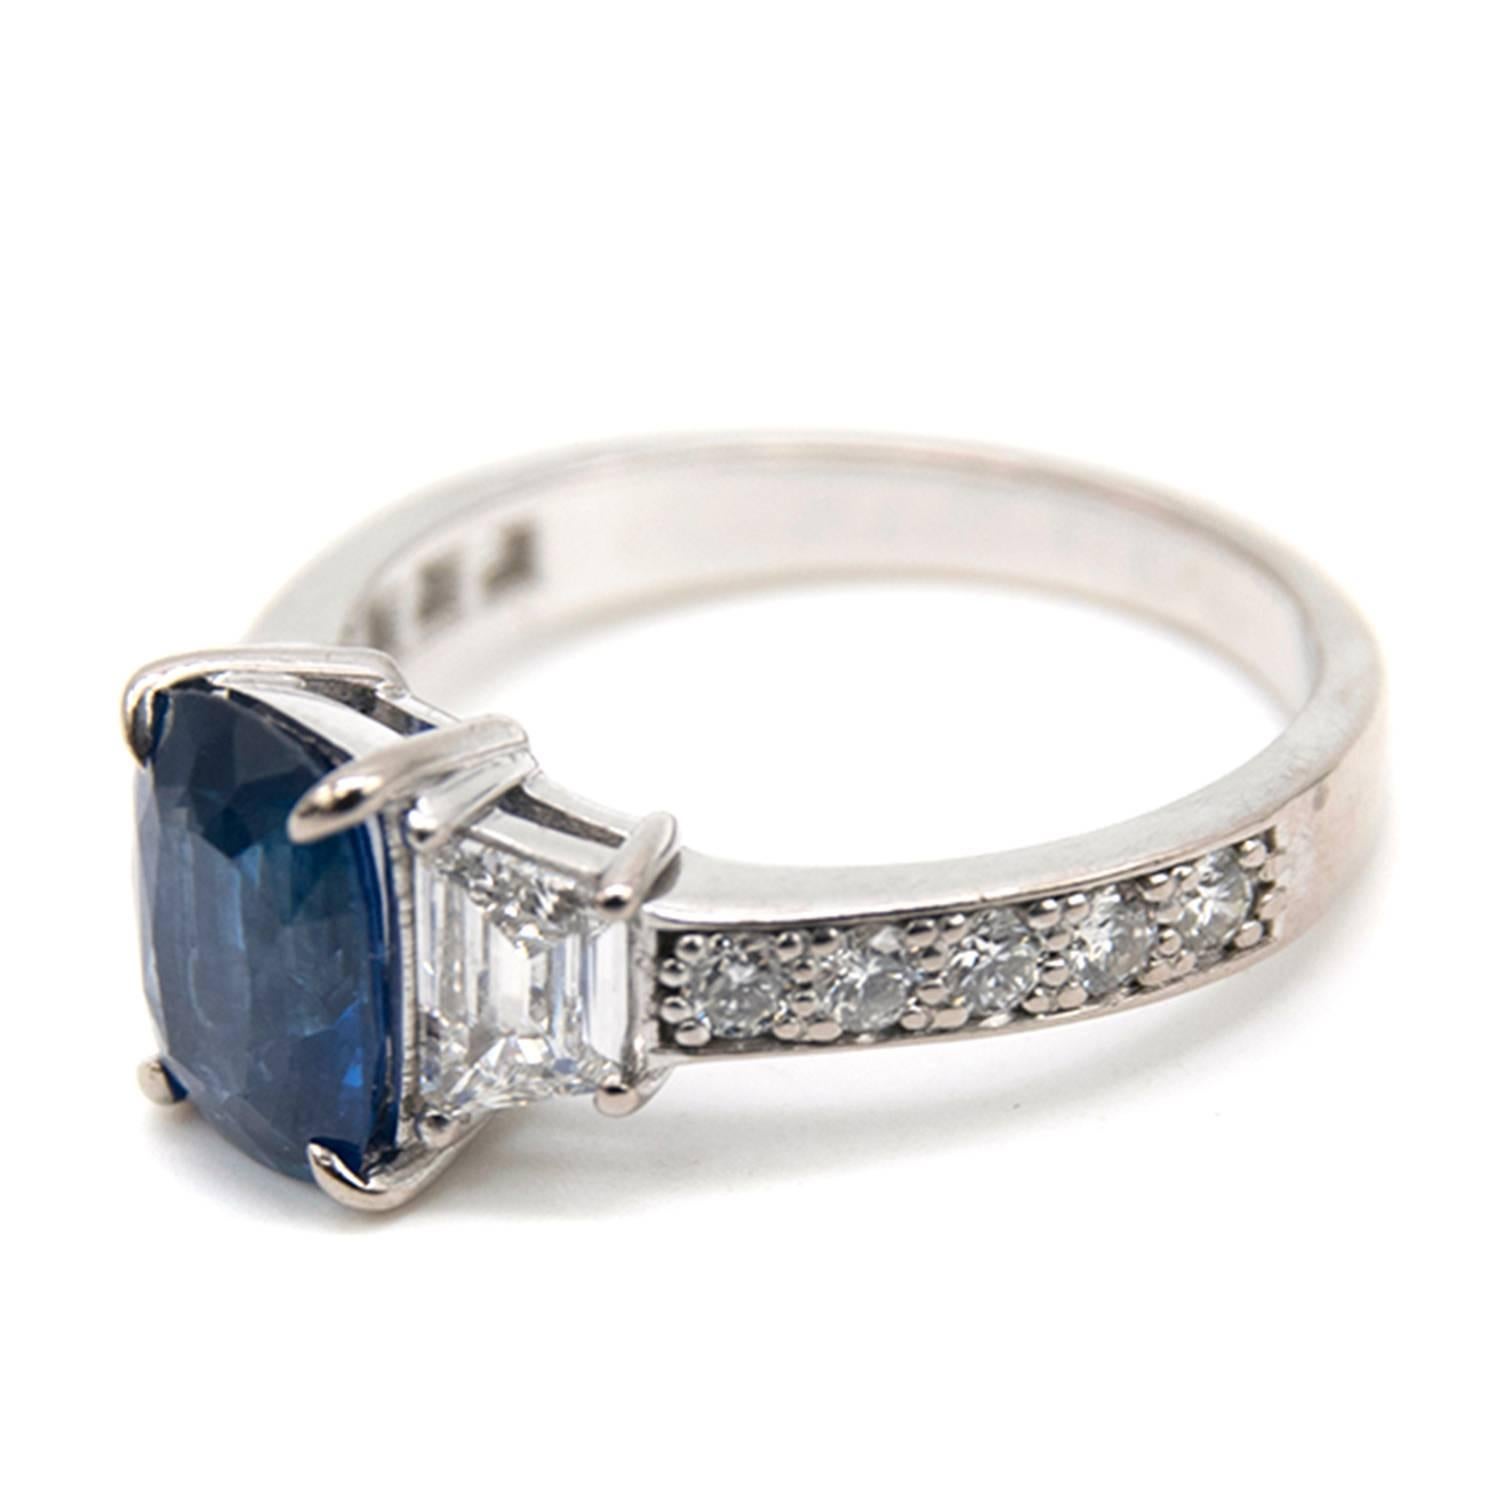 Sapphire and diamond set ring. Centrally set with a cushion shaped mixed cut medium blue sapphire, measuring approx. 9.27mm x 6.57mm, depth 4.36mm. Calculated carat weight 2.50 carat, moderate inclusions, some colour banding, surface facet wear and